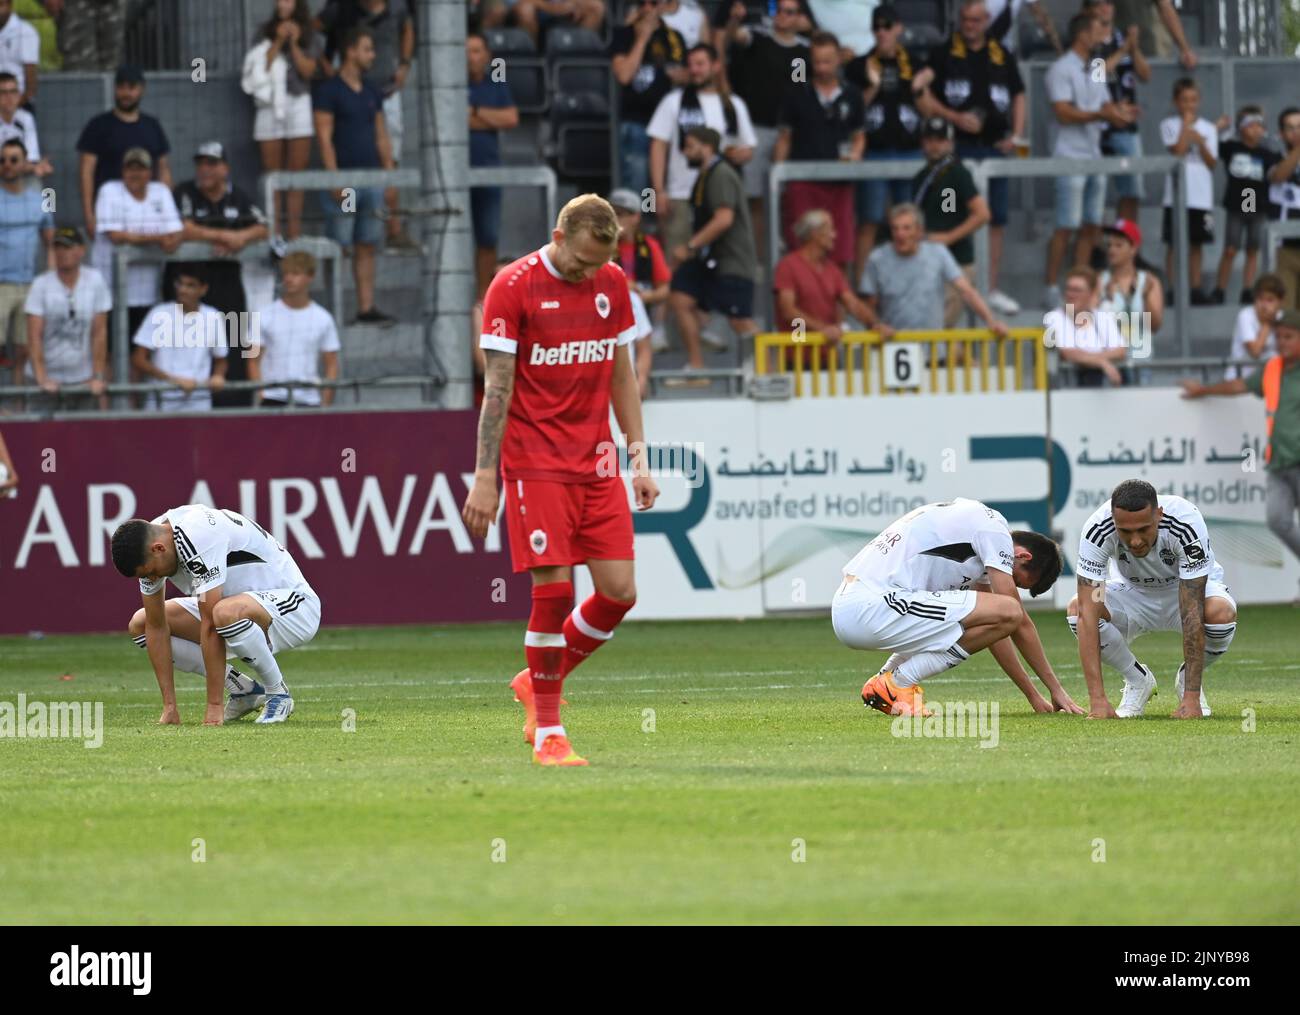 Eupen's players react during a soccer match between KAS Eupen and Royal Antwerp FC RAFC, Sunday 14 August 2022 in Eupen, on day 4 of the 2022-2023 'Jupiler Pro League' first division of the Belgian championship. BELGA PHOTO JOHN THYS Stock Photo